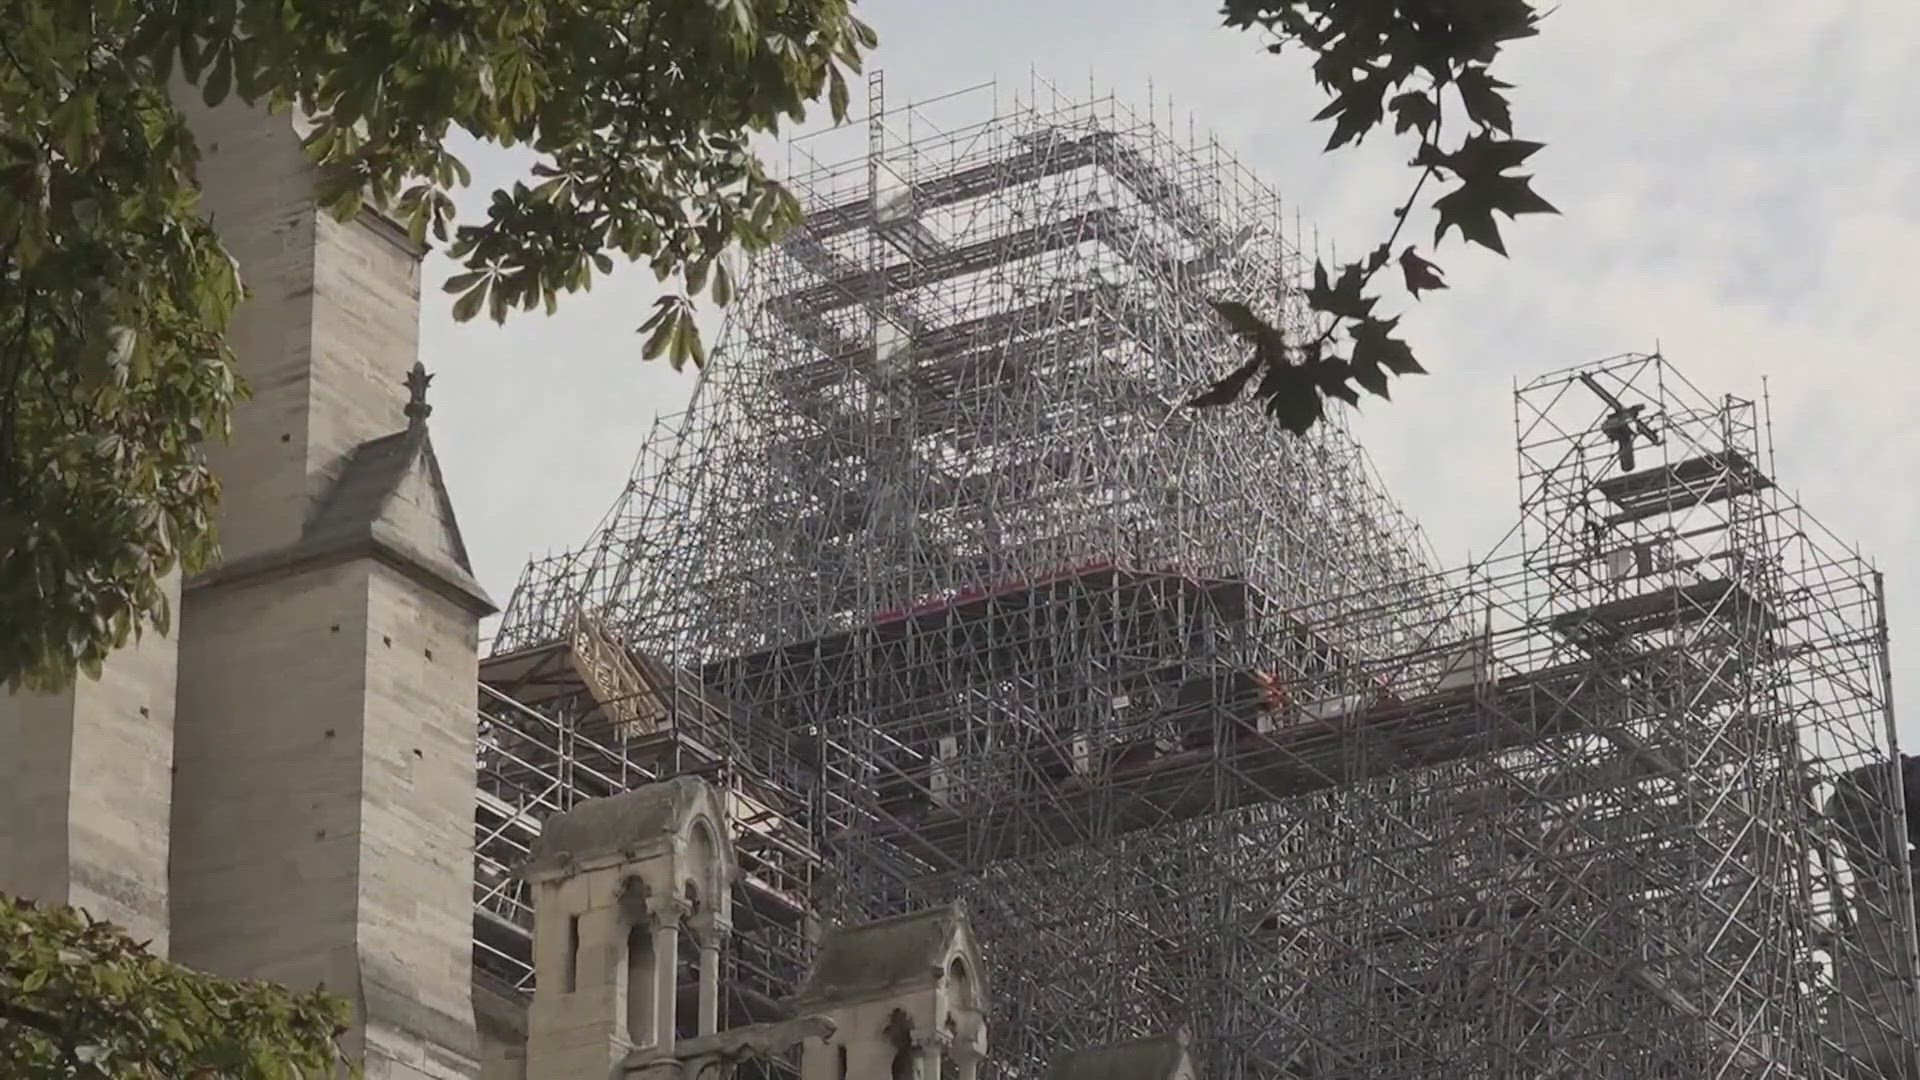 The cathedral's new reconstruction chief said he wanted the scaffolding around the spire to be taken down before Paris hosts the 2024 Summer Olympic Games.